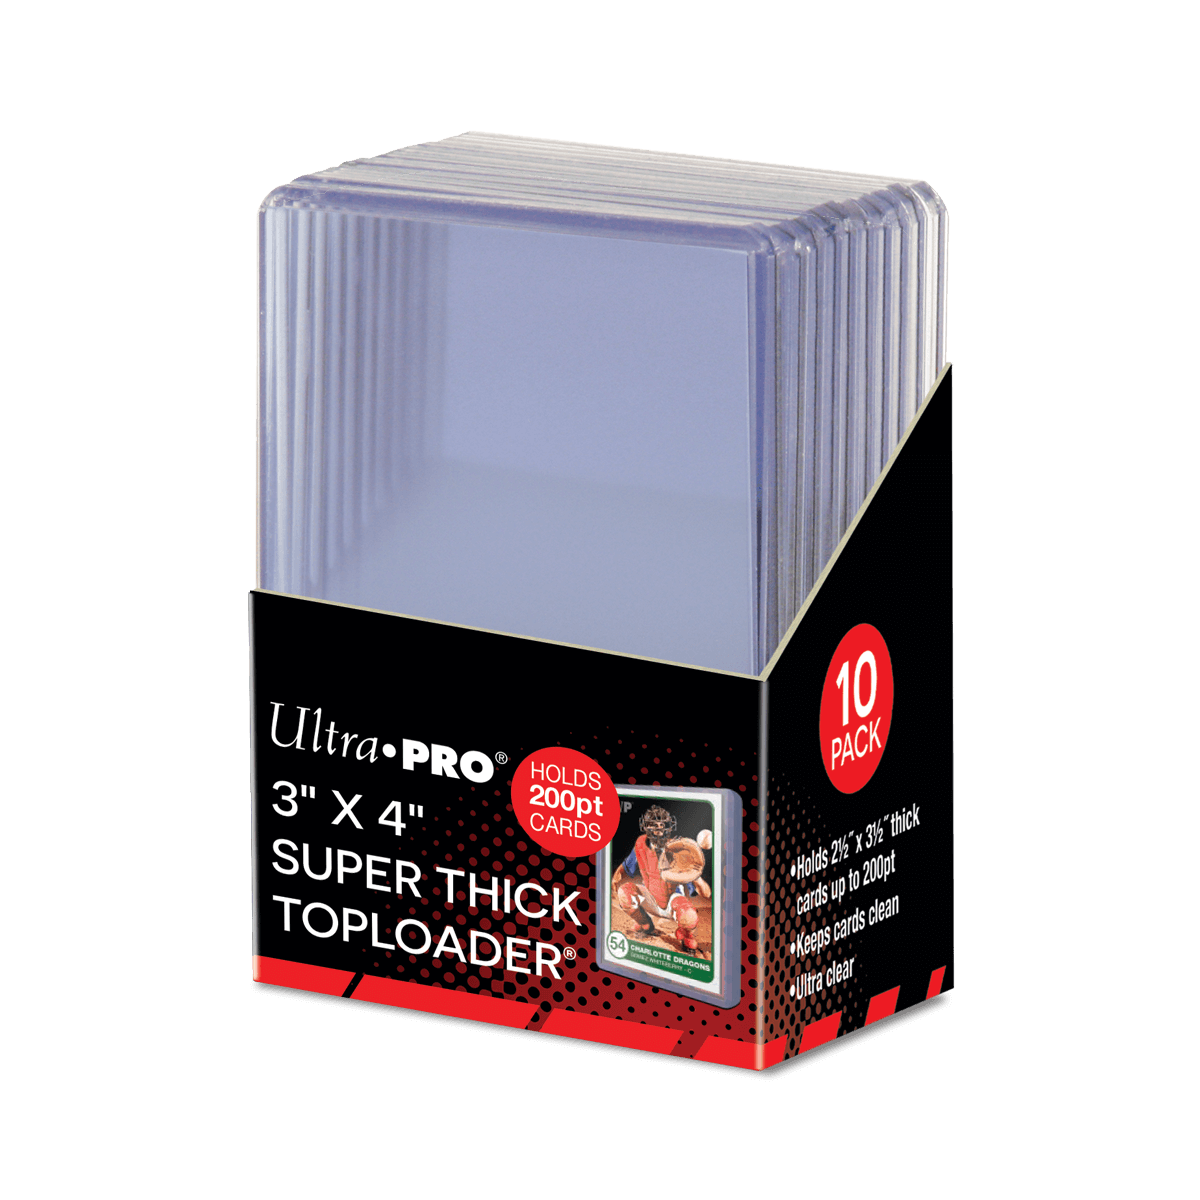 3 x 4 Super Thick 200PT Toploaders (10ct)